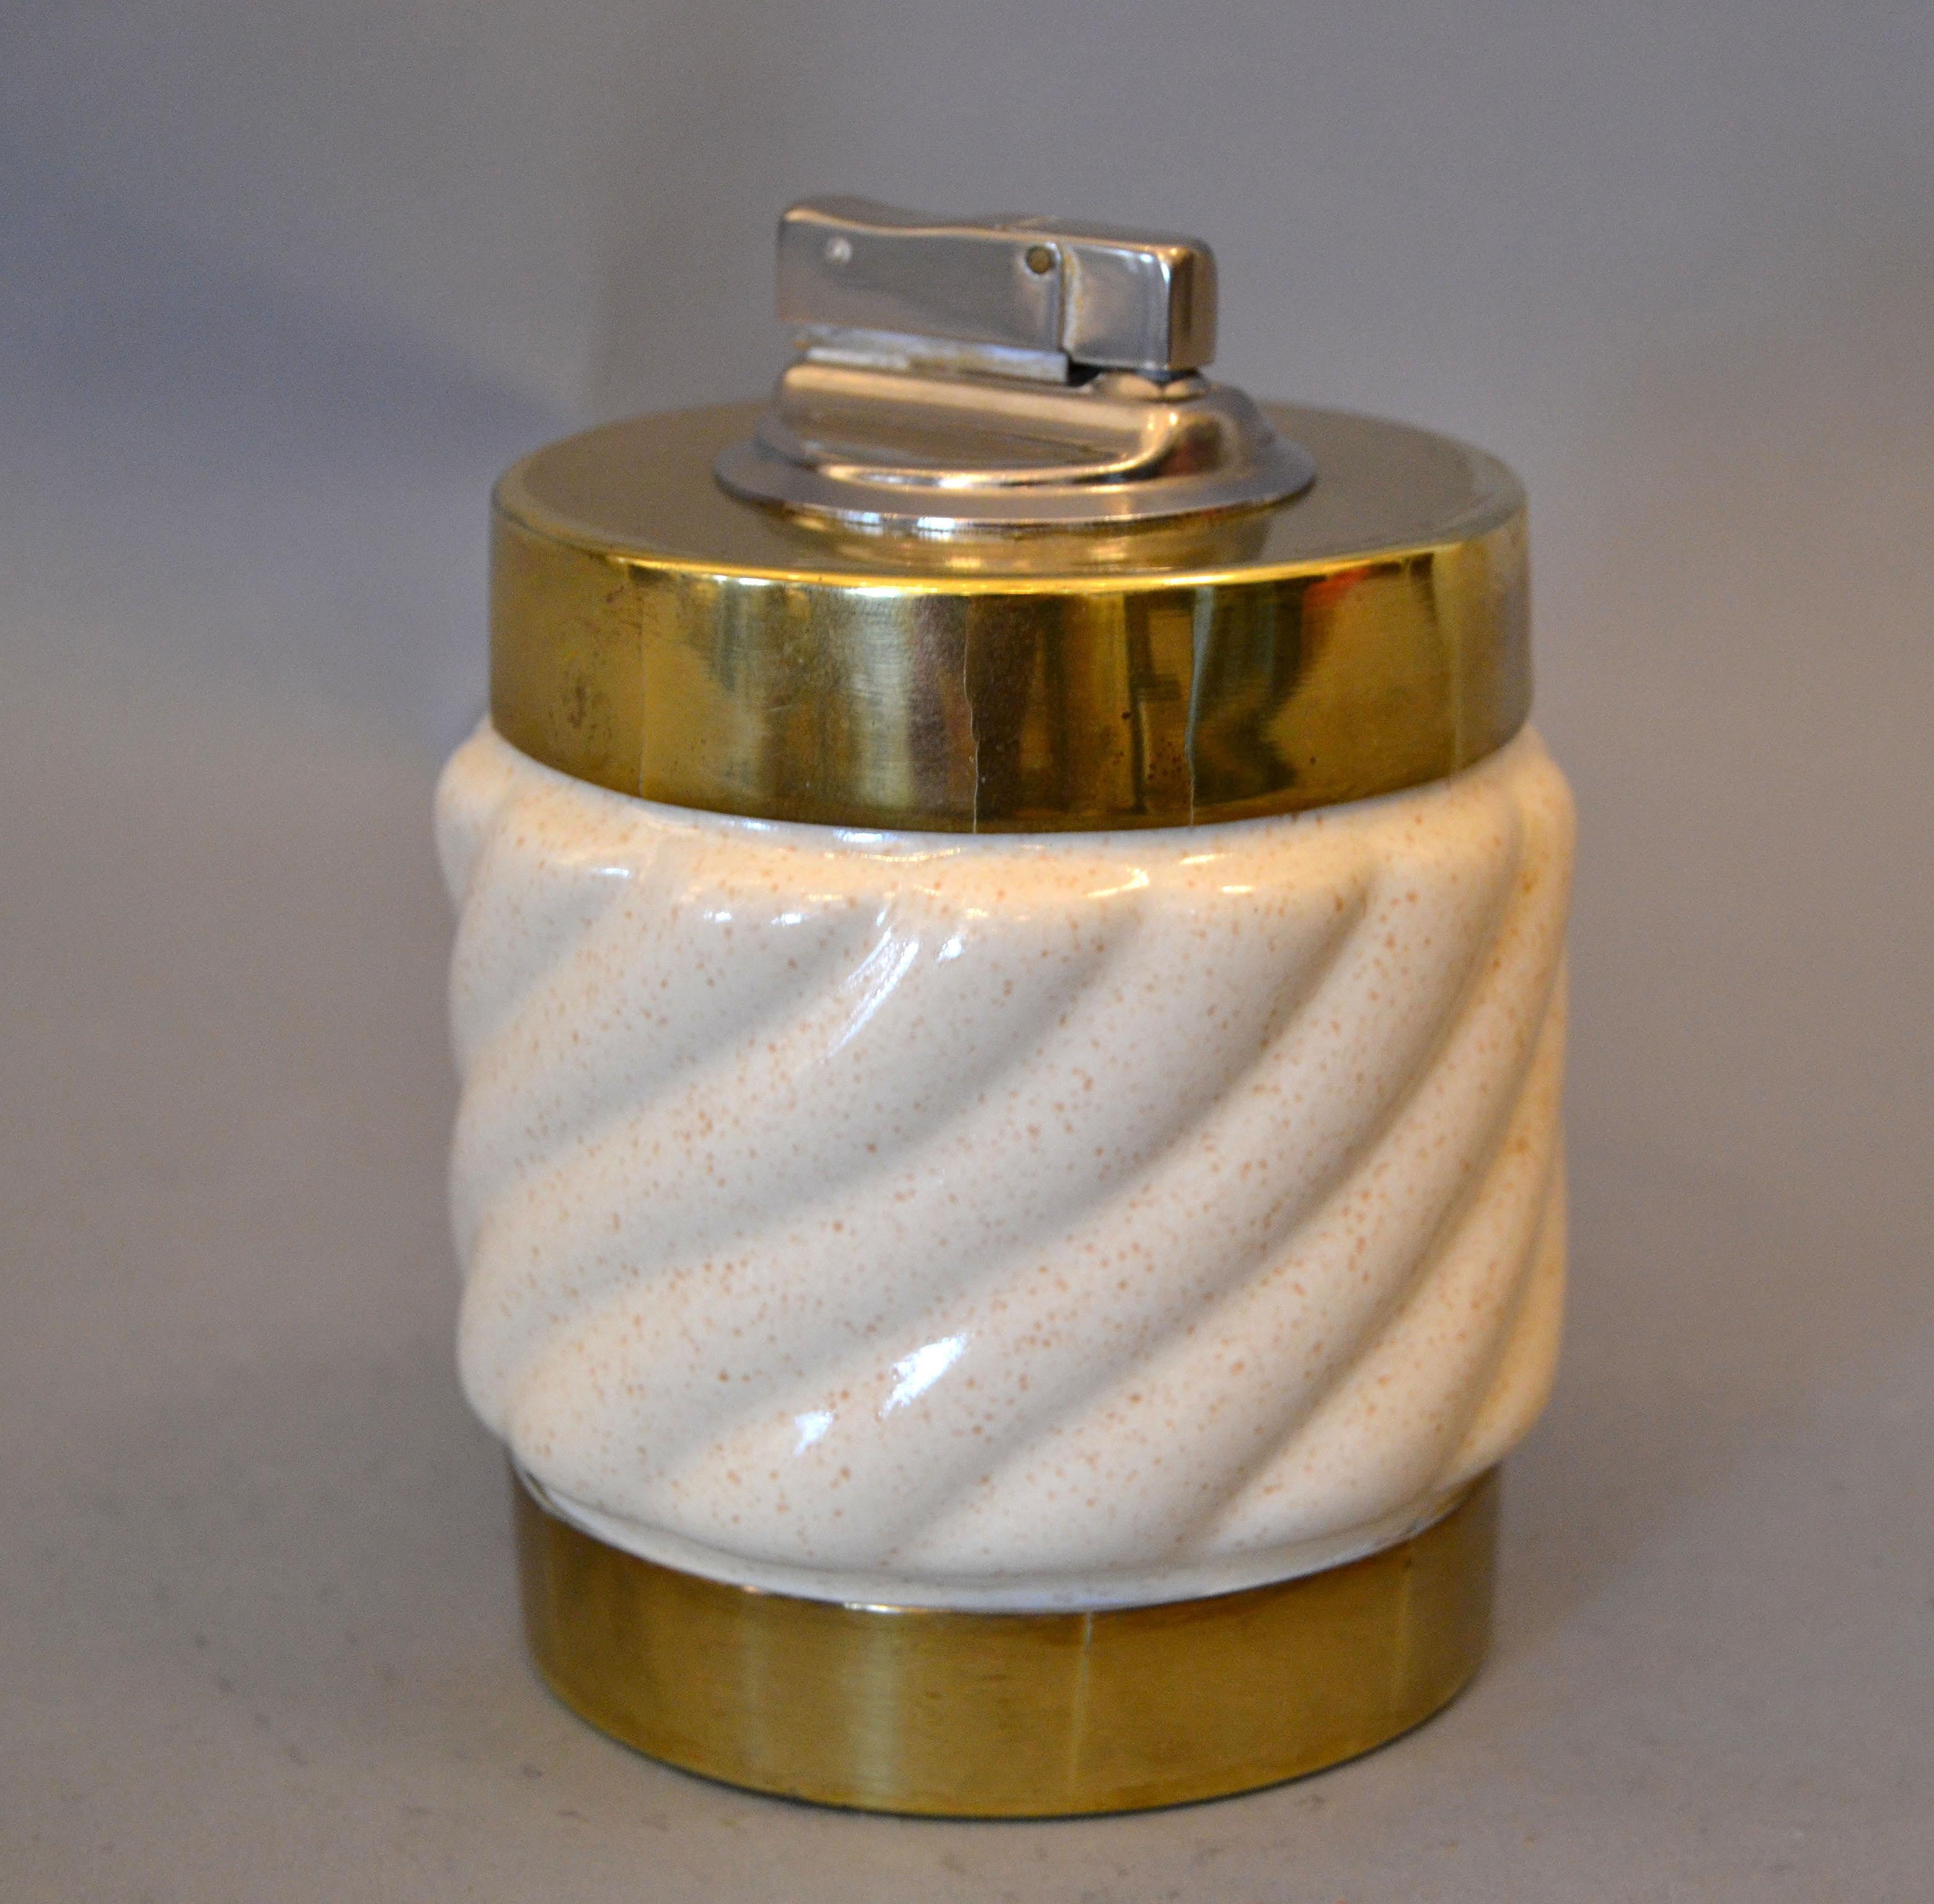 Mid-Century Modern chic ceramic and brass lighter in beige made in Italy.
Signed underneath: Tommaso Barbi, made in Italy.
A beautiful desk accessory.
Note: The lighter has not been tested.
 